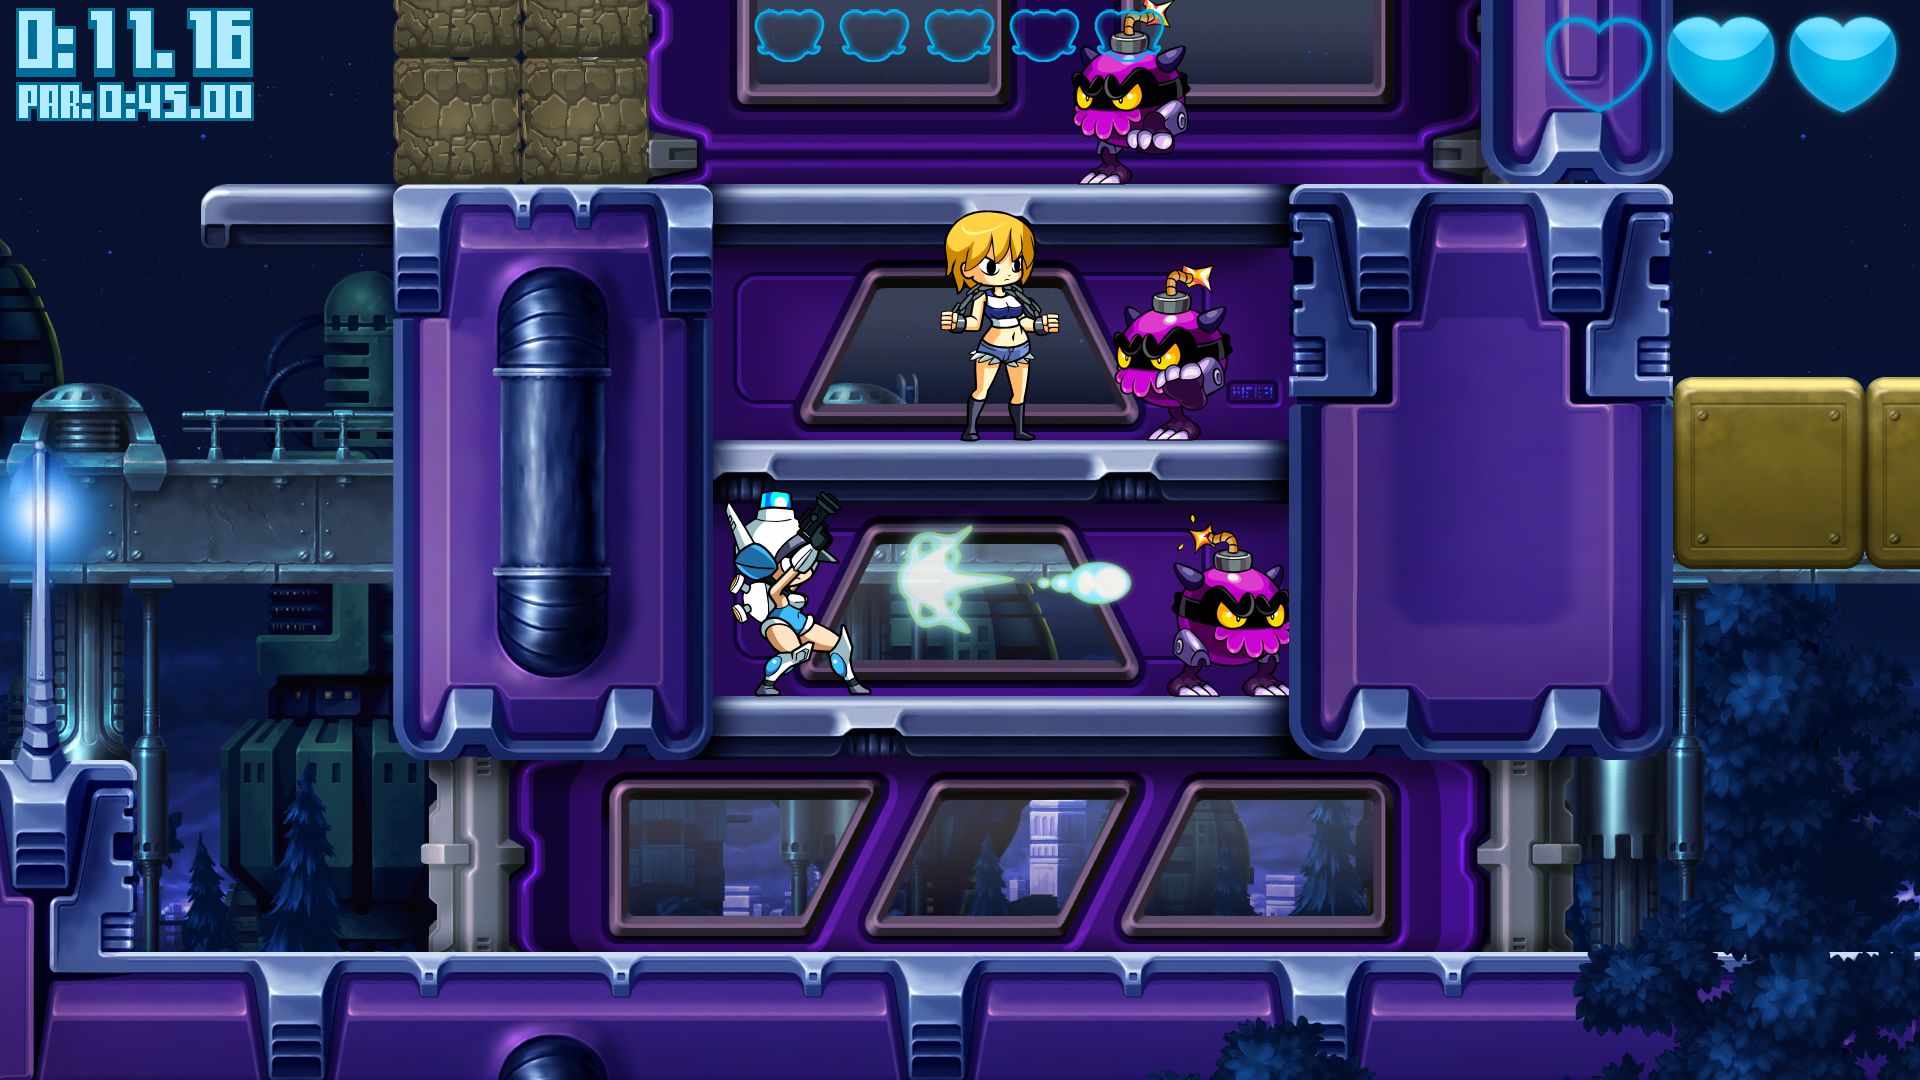 Wayforward Launches Mighty Switch Force Collection Geektyrant